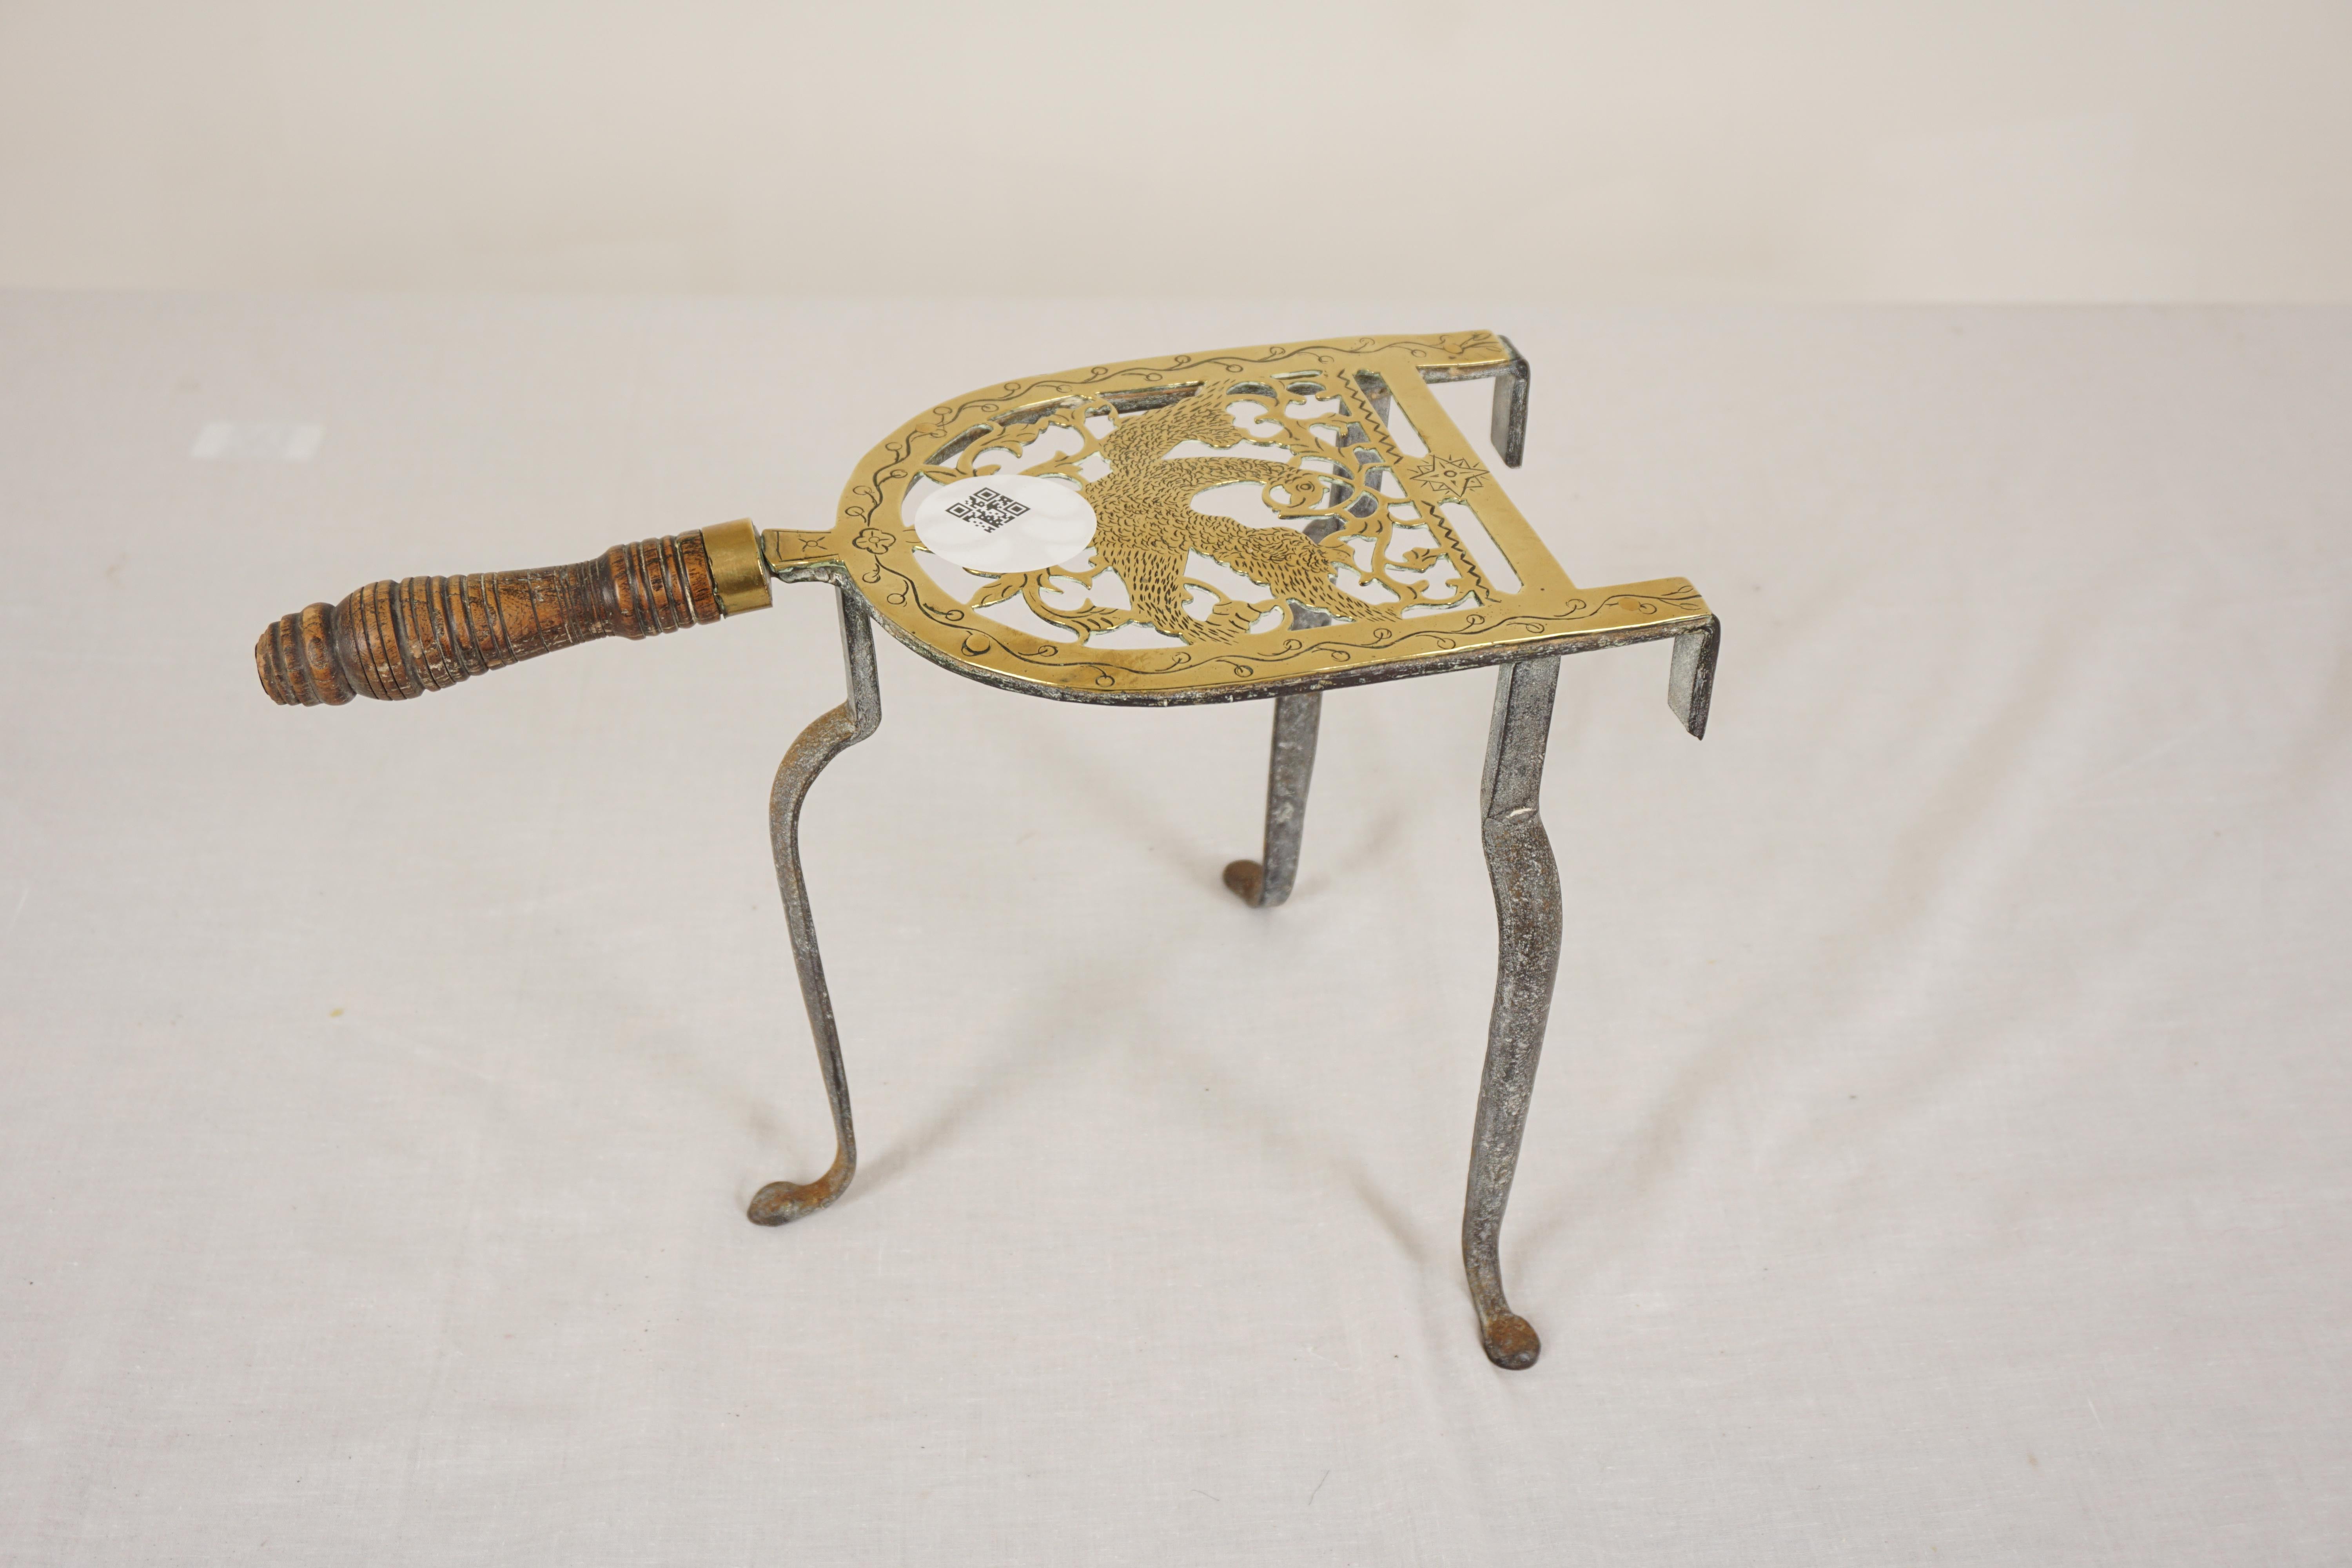 Ant. Victorian Brass Trivet, Kettle Stand, Decorative Stand, Scotland 1840, H1034

Scotland 1840
Solid Brass (embossed with bird)
Other embossed on top
Turned walnut handle
All standing cabriole metal legs
All original and in good